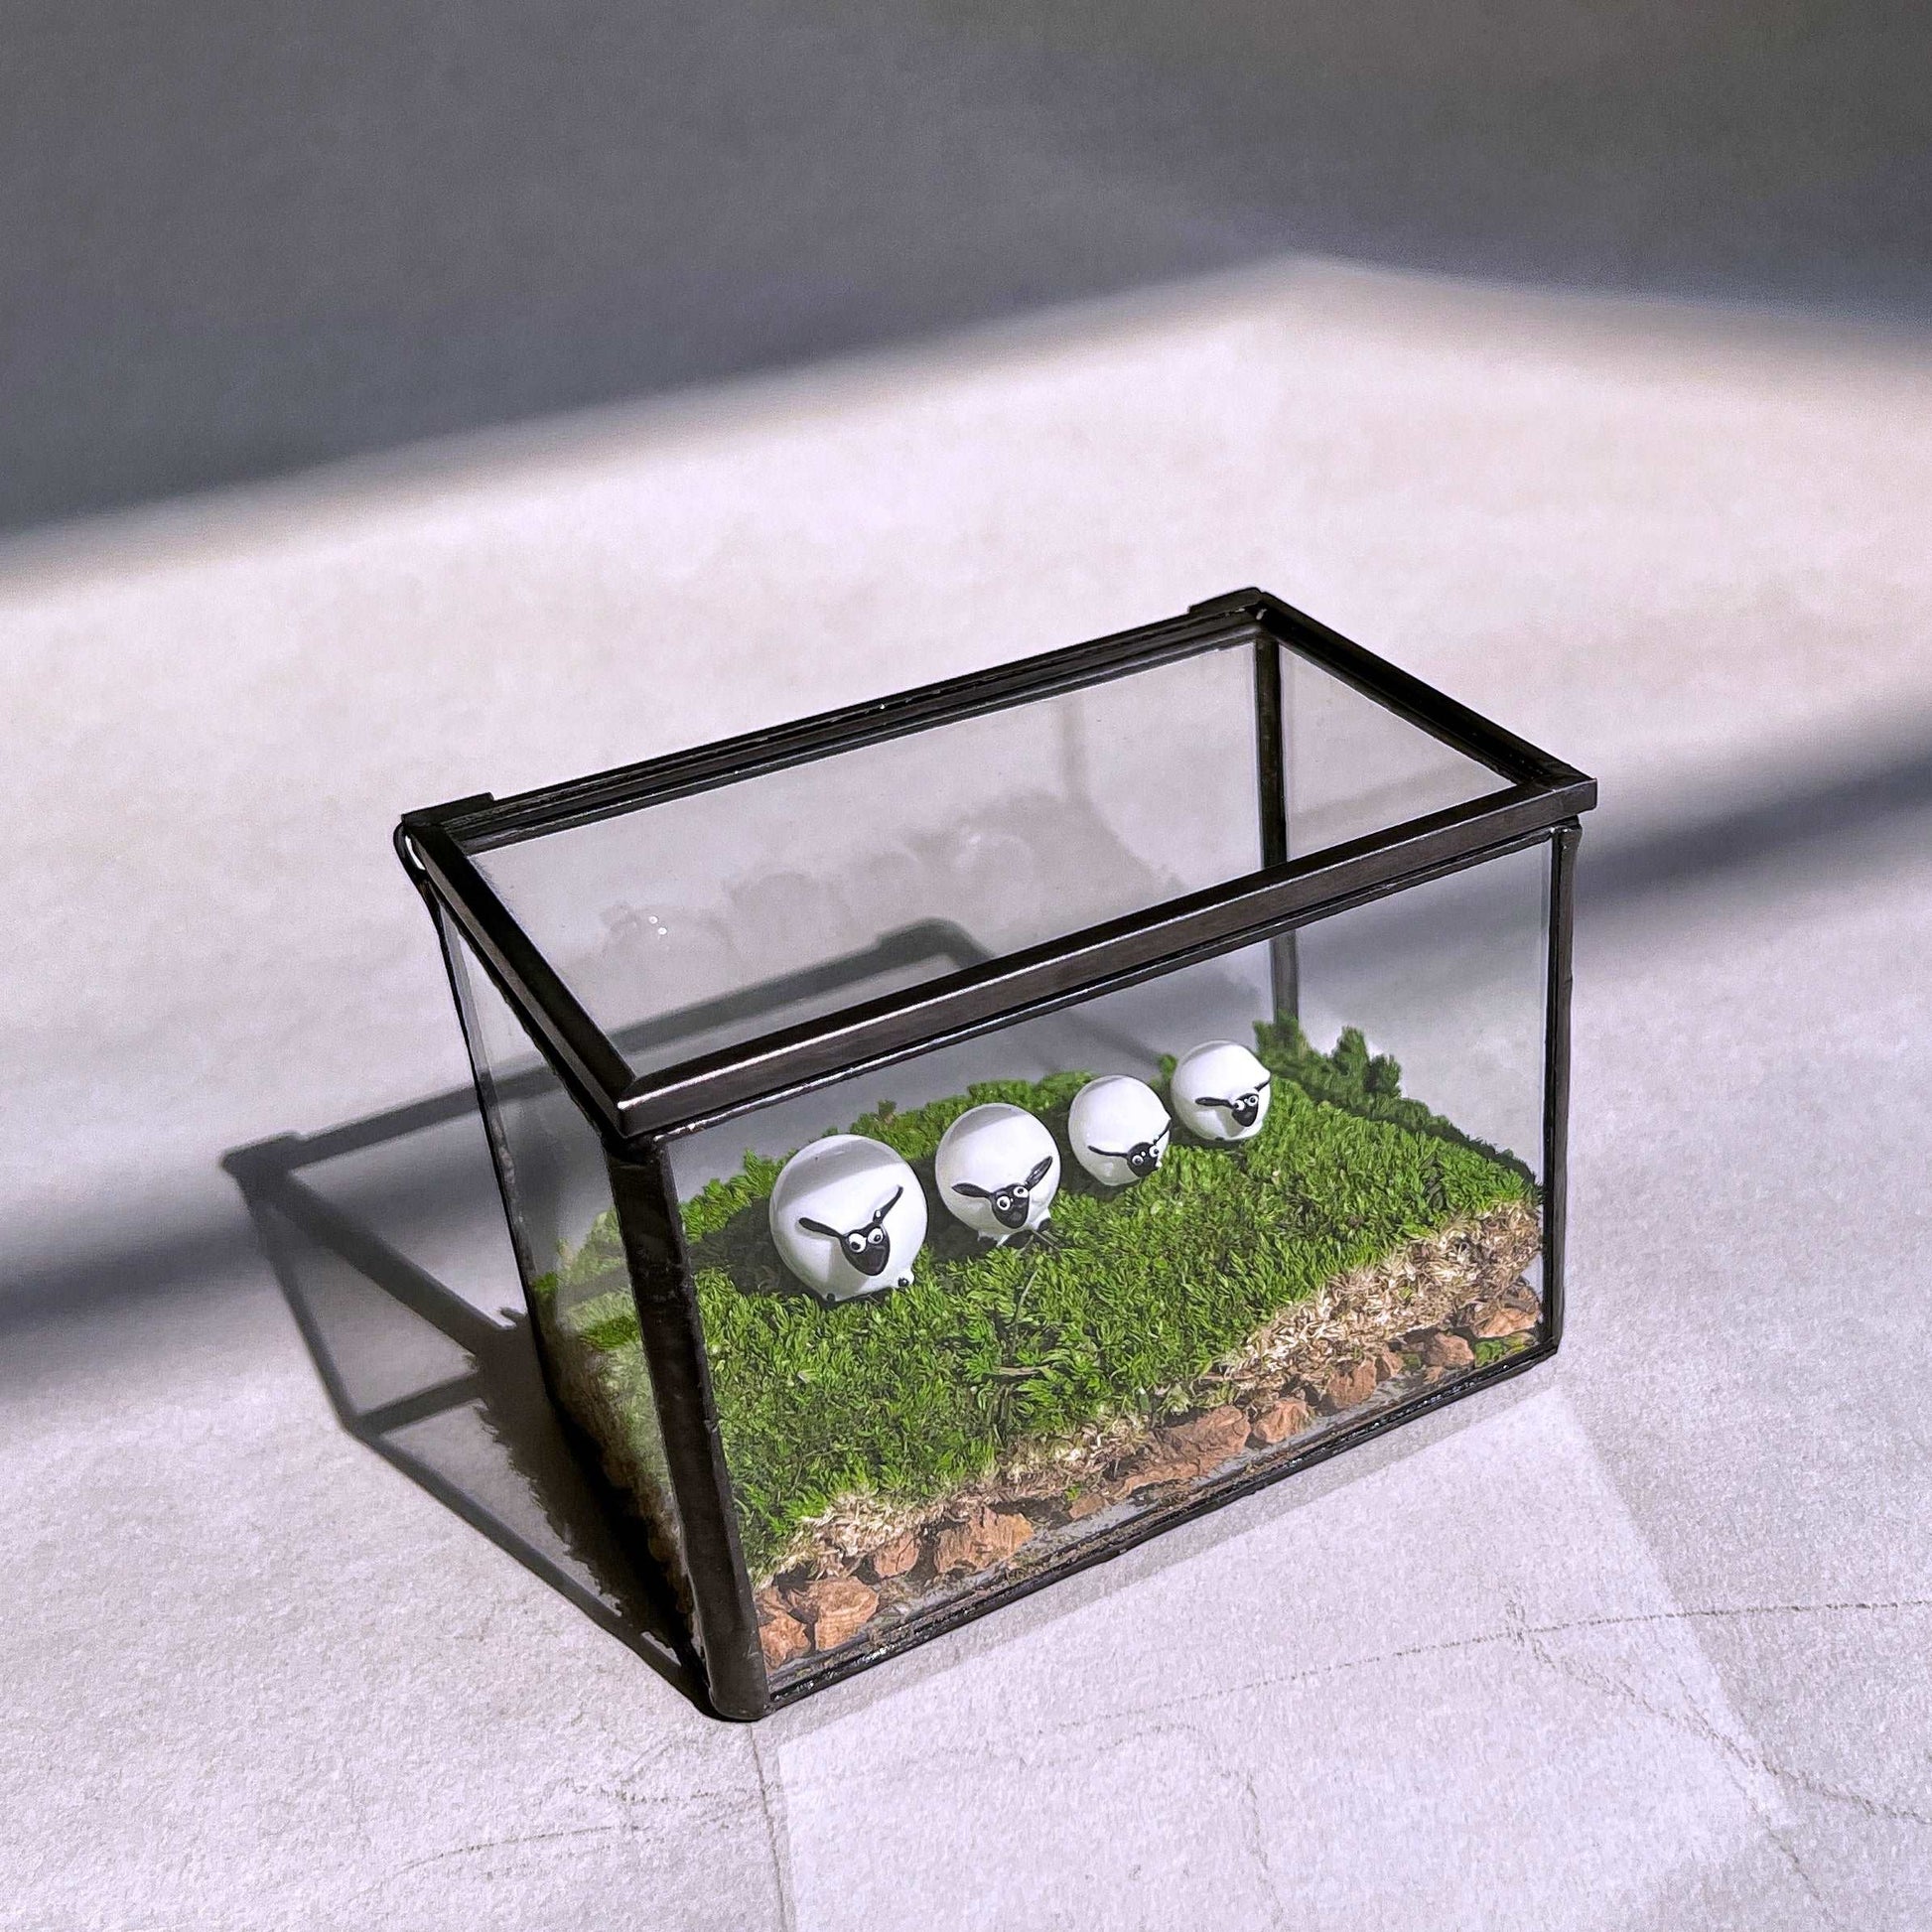 Mossbox Little Sheep Desktop Decoration - Micro Landscape with PreservTransform your desk into a serene pasture with our charming Little Sheep Desktop Decoration. This handcrafted micro landscape lawn, set within a clear glass box, fea